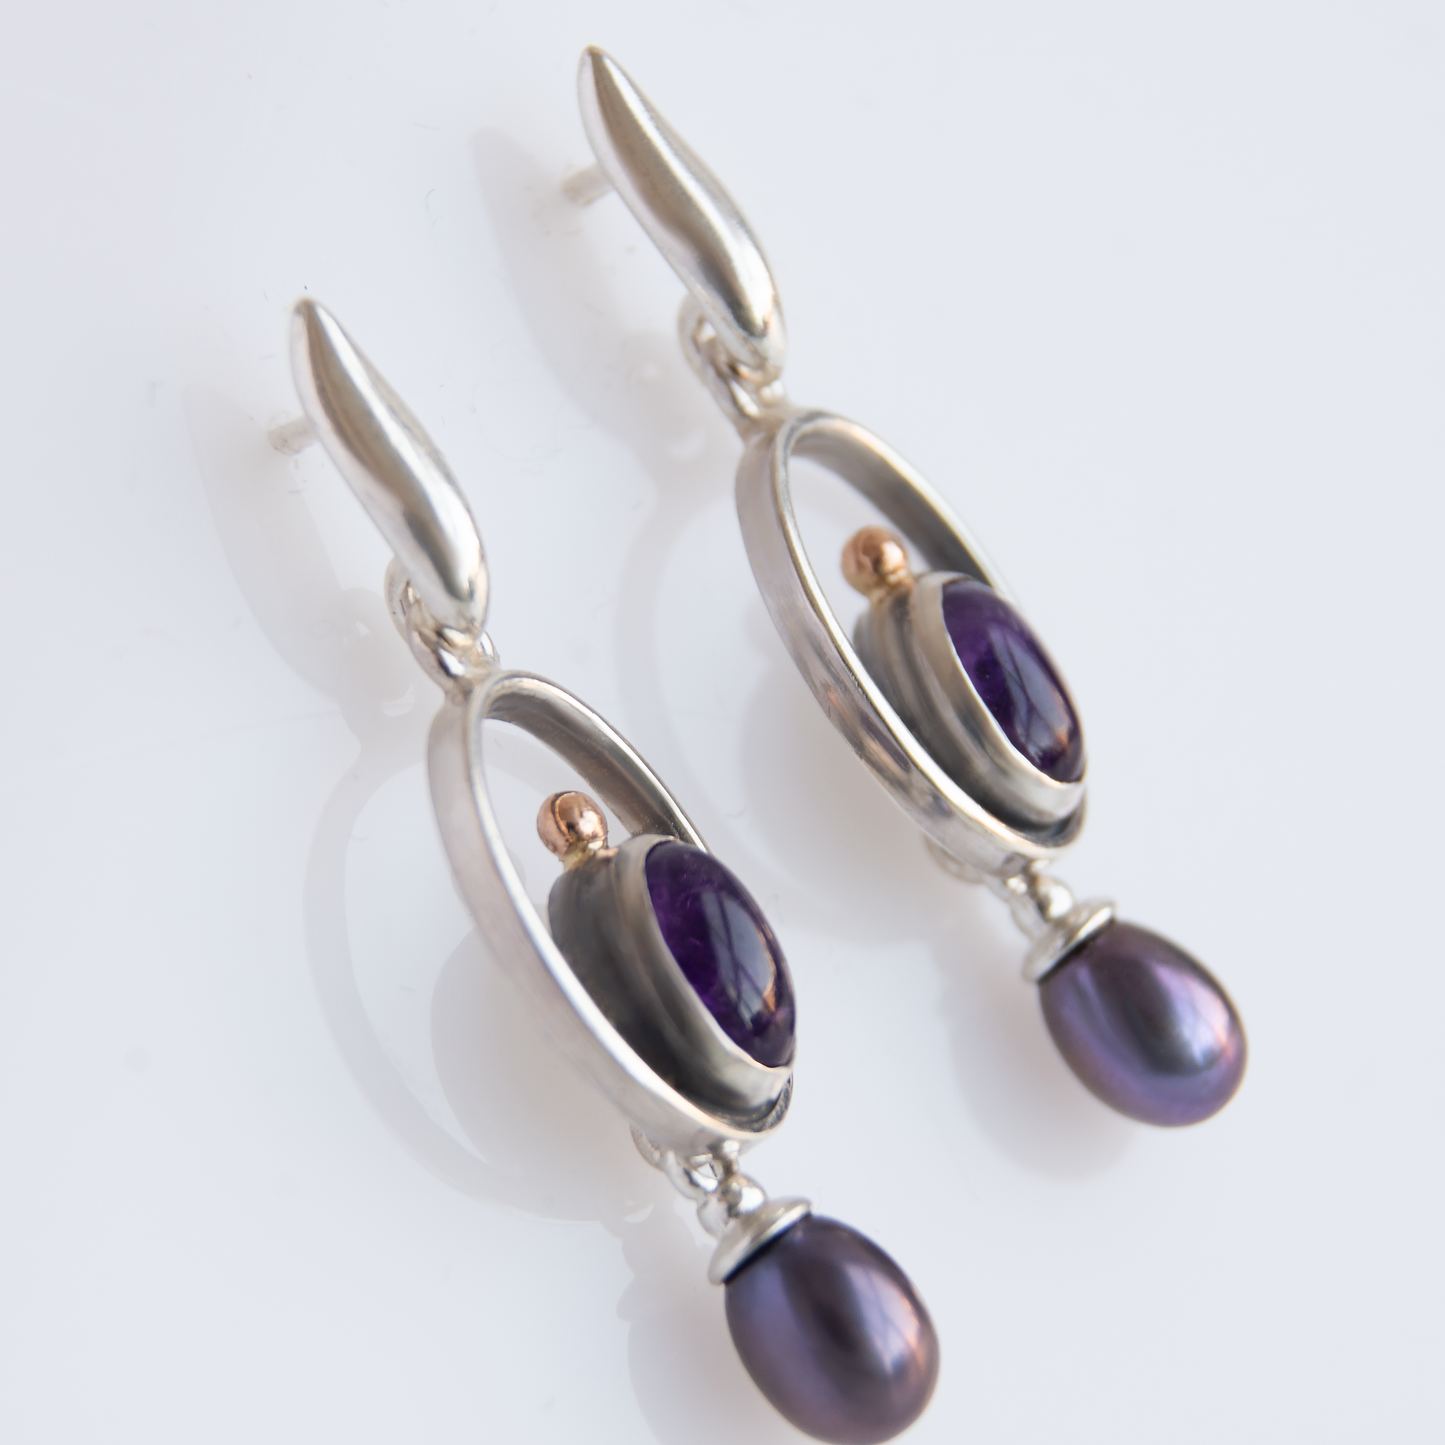 Drop Oval Frame Earrings With Amethyst and Peacock Pearls